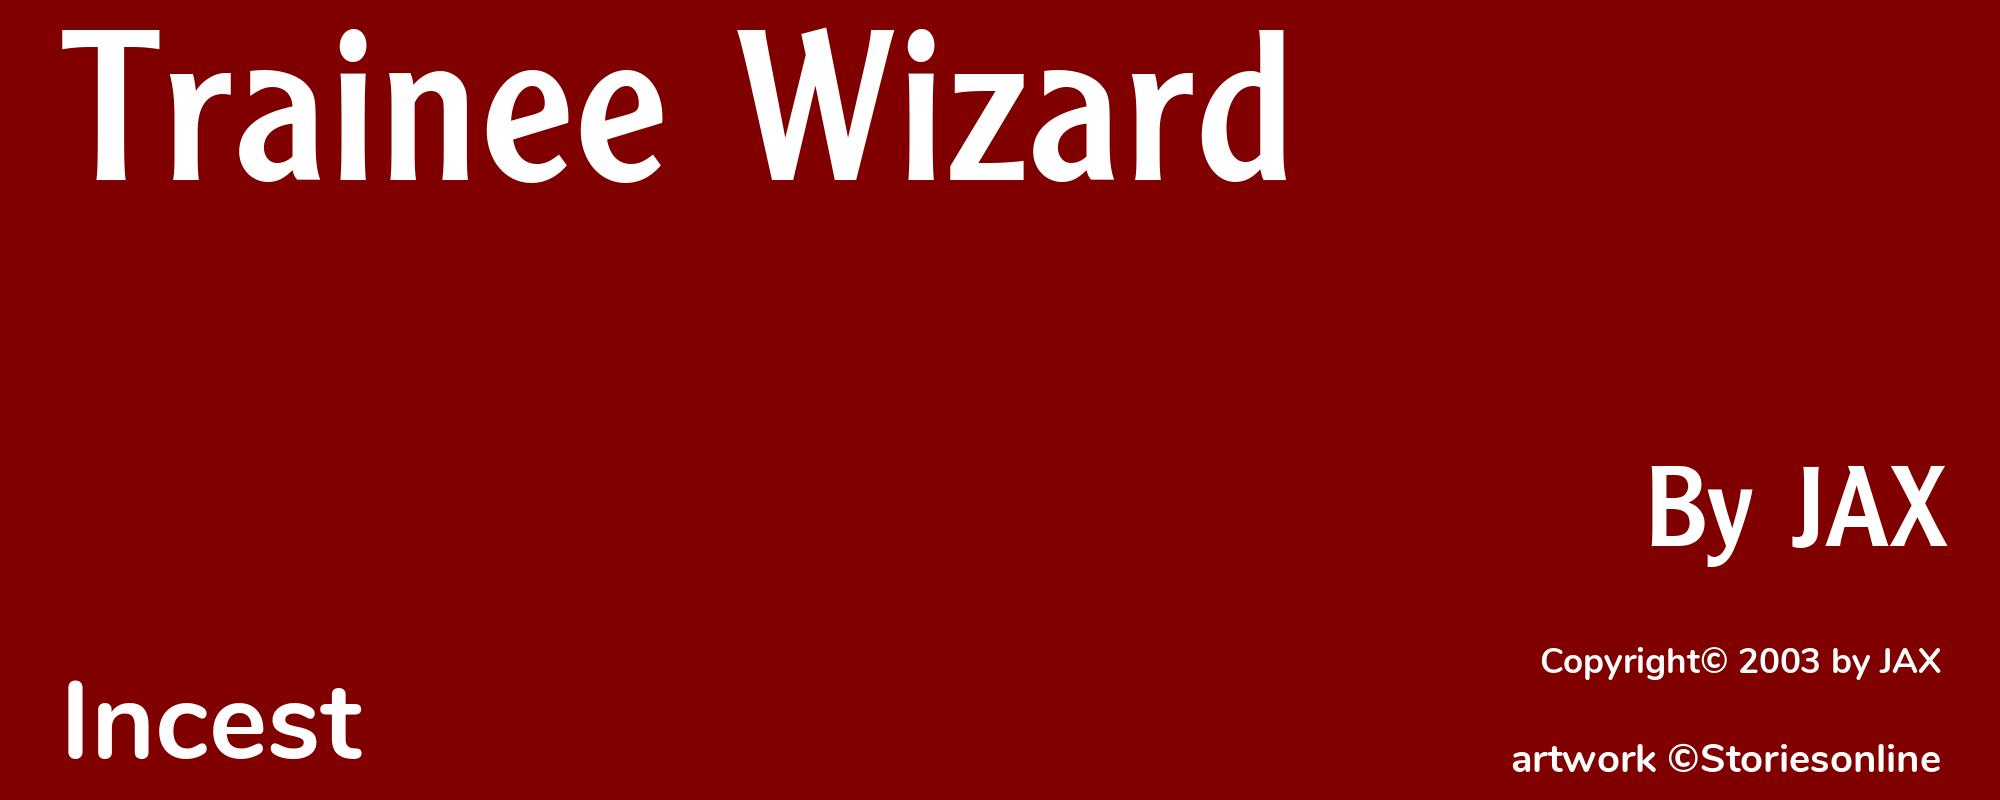 Trainee Wizard - Cover